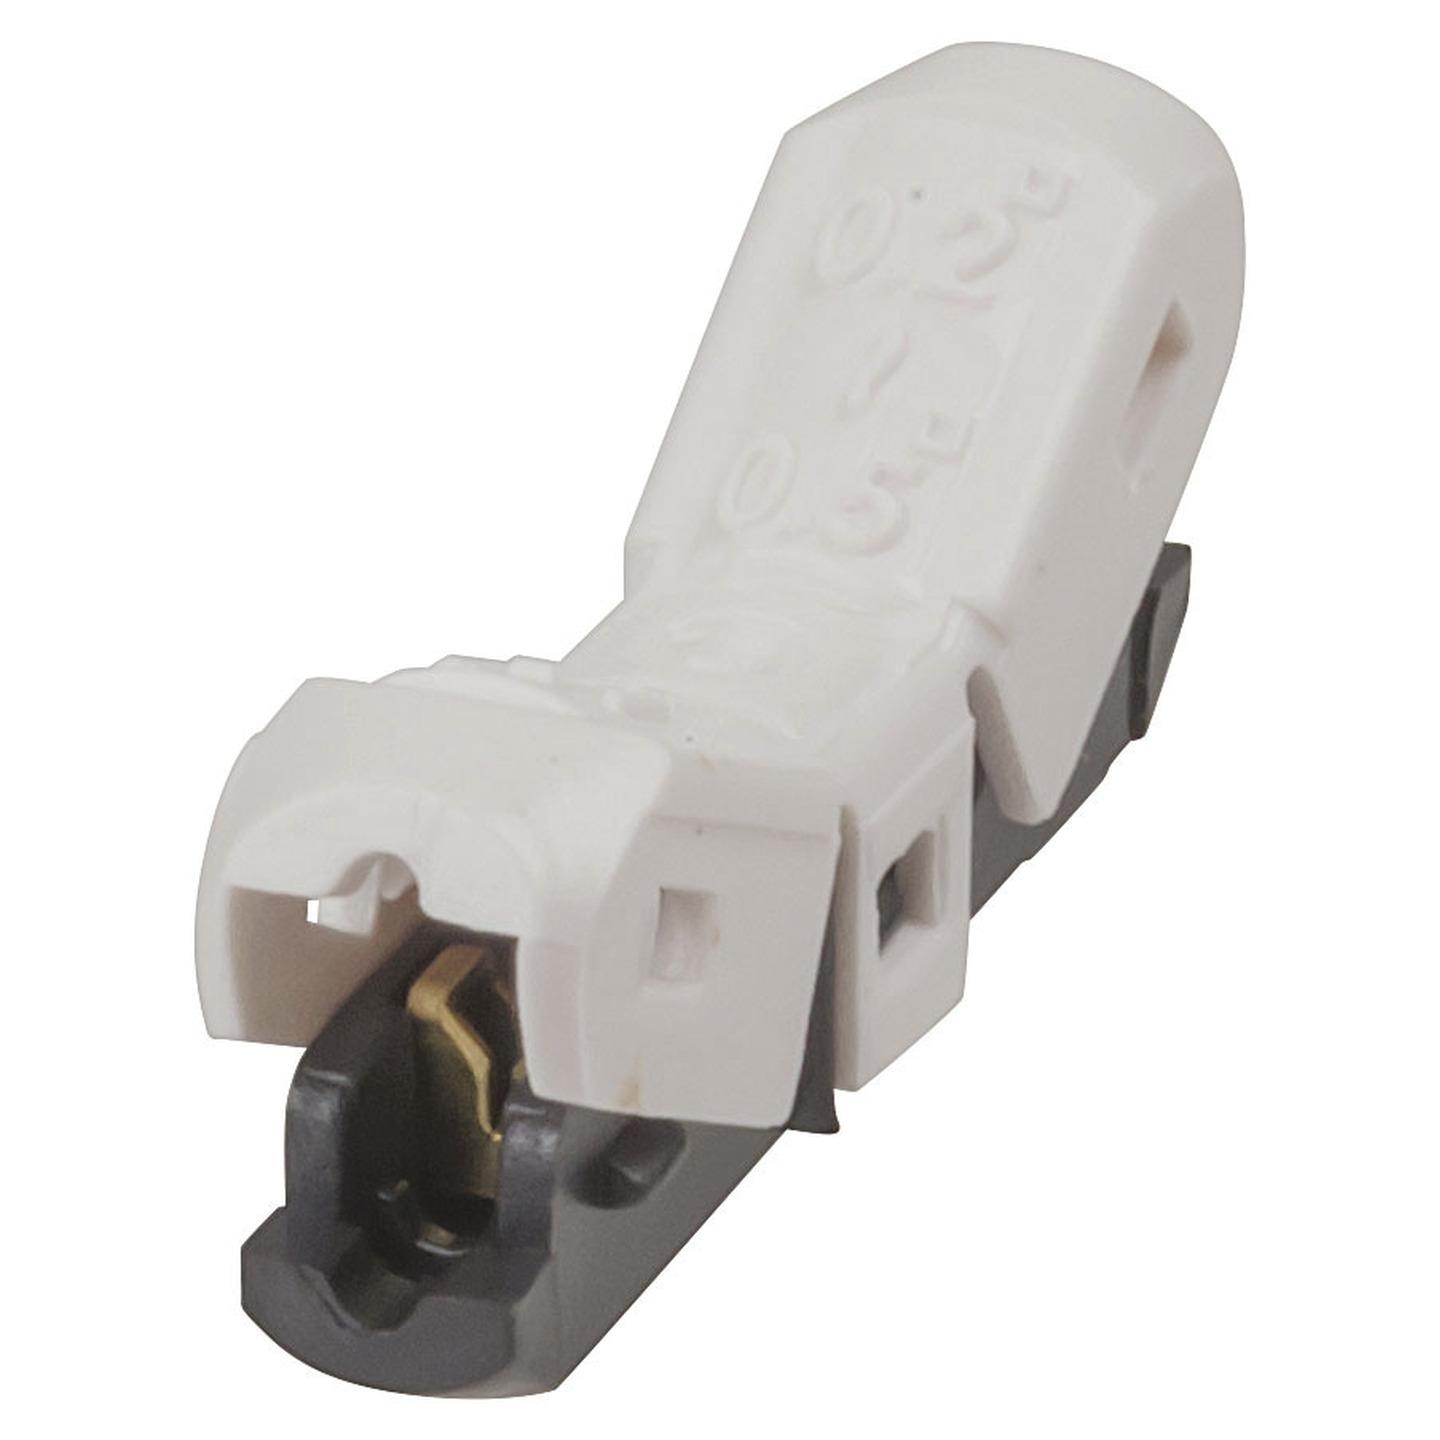 In-line Cable Clamp Connector - 3A - Pack of 6